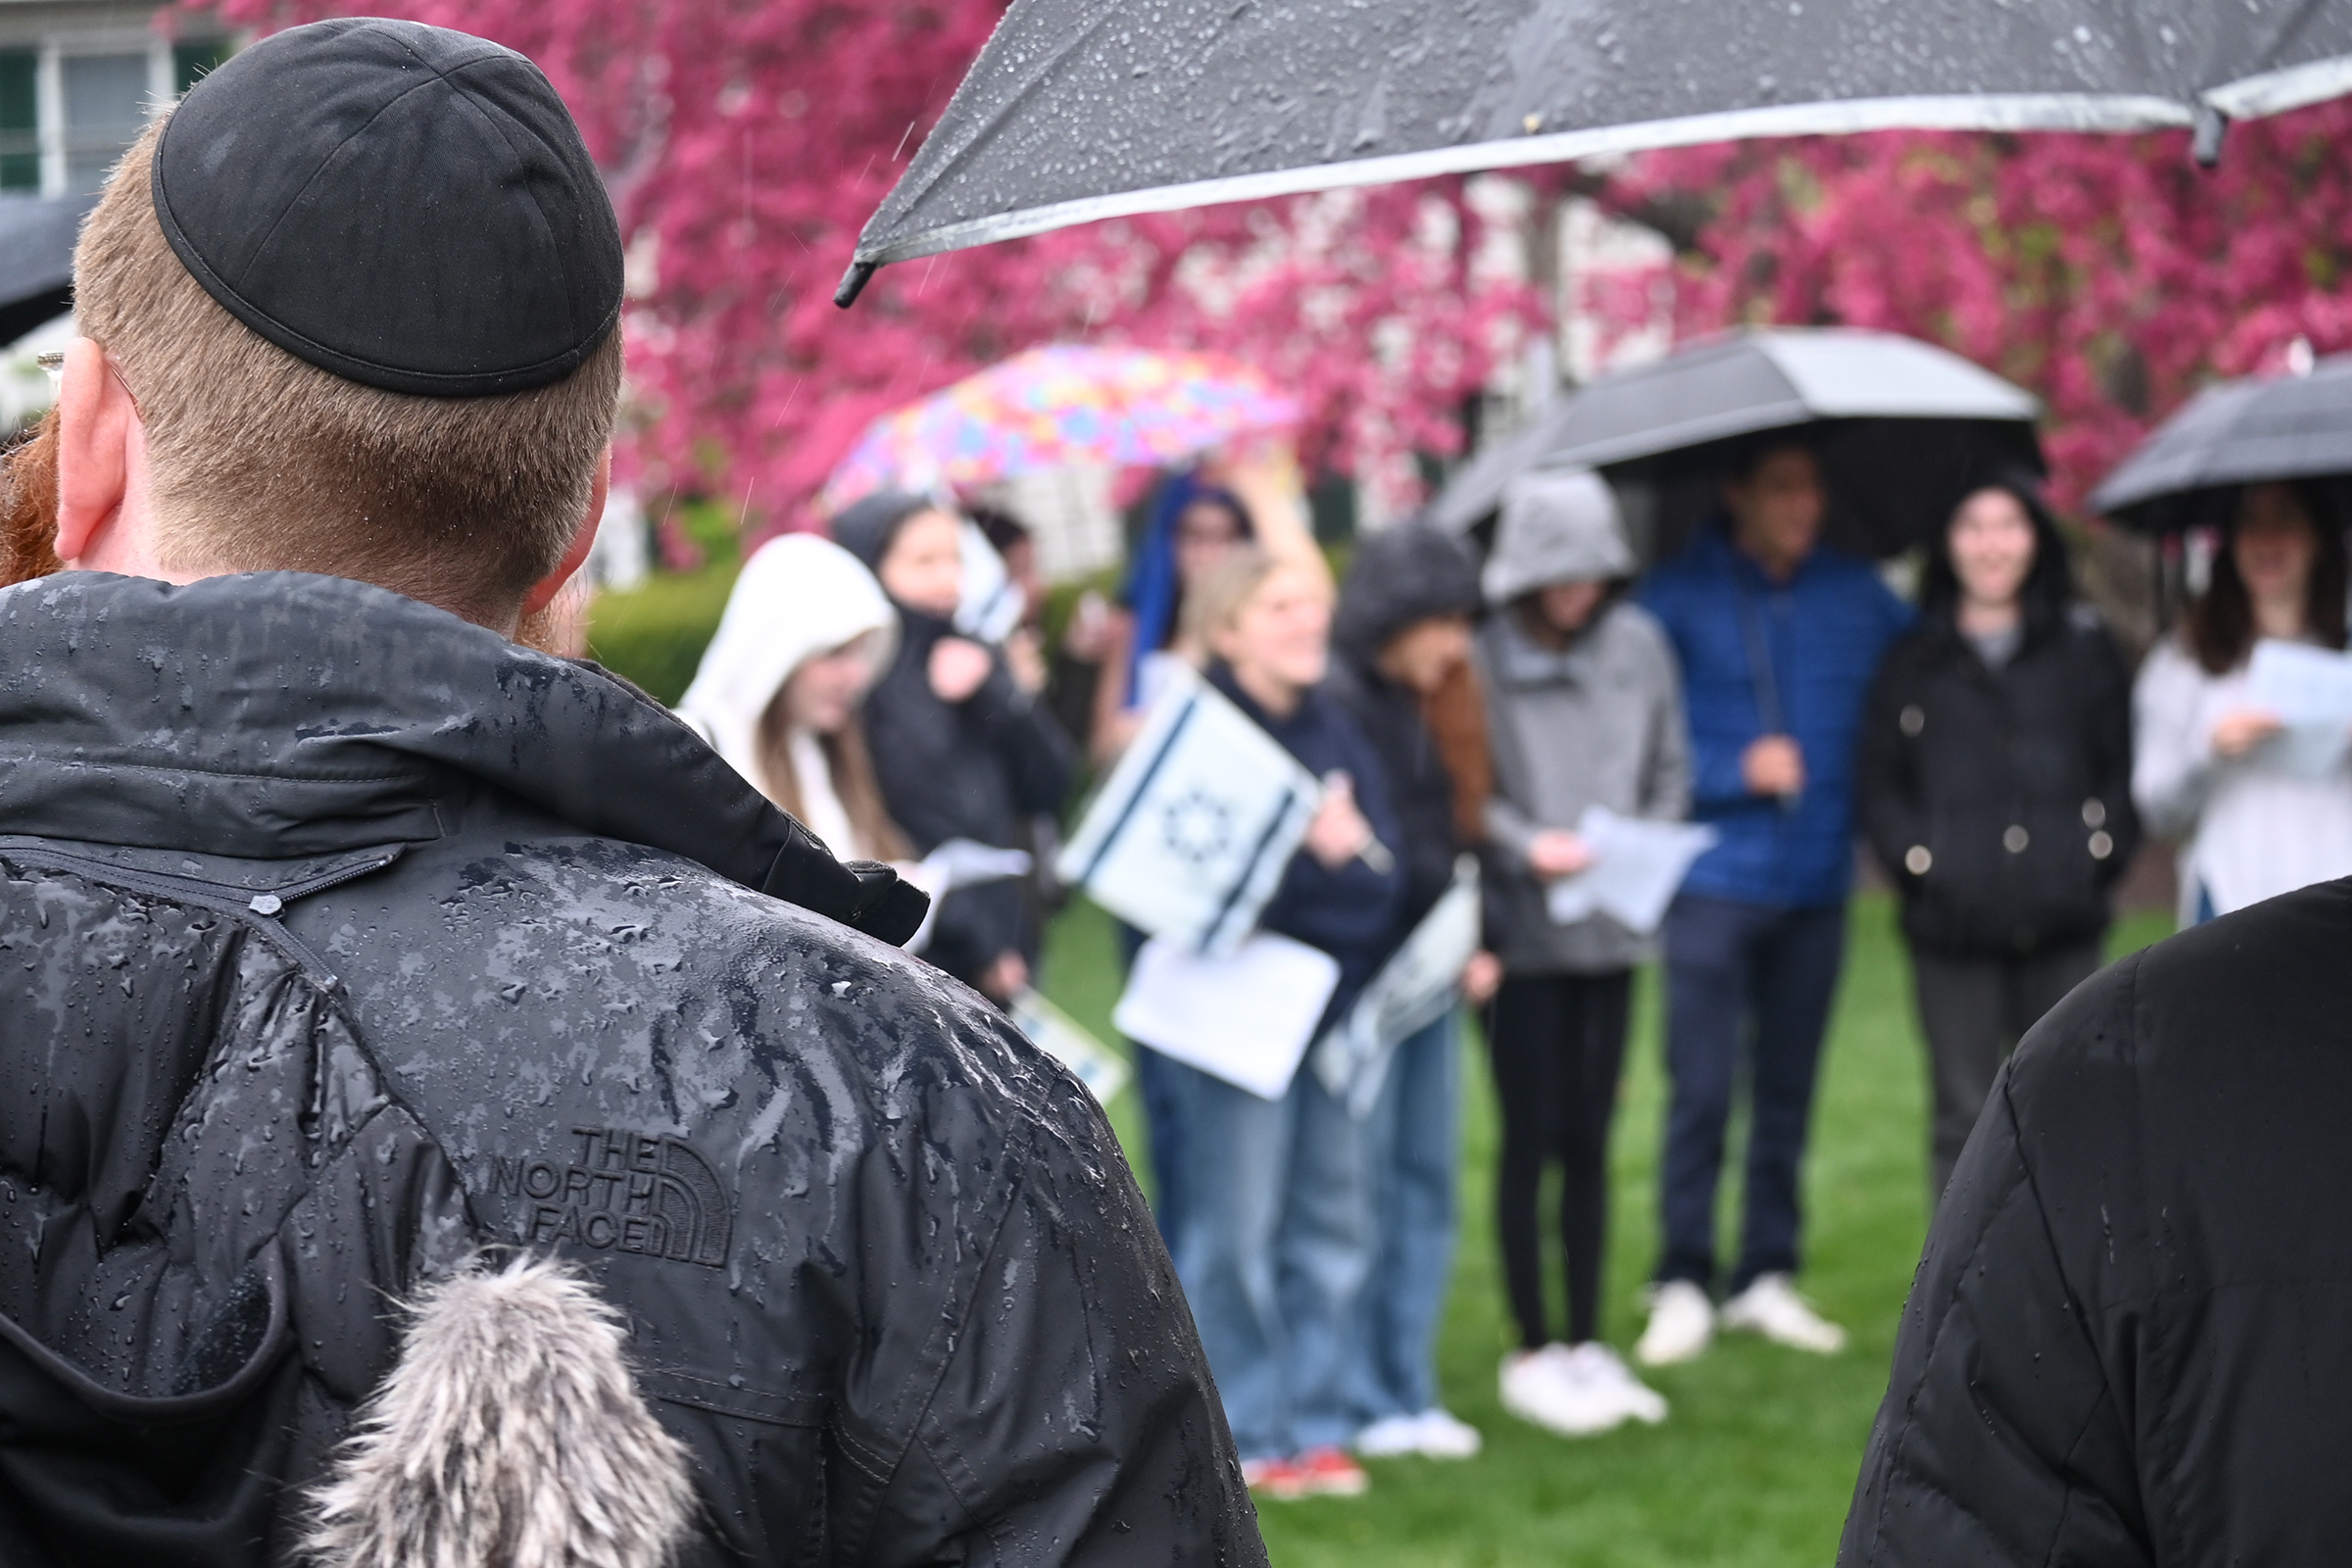 Jewish students joined together for a community gathering on April 26 as the encampment continued into its second day at Northwestern University.